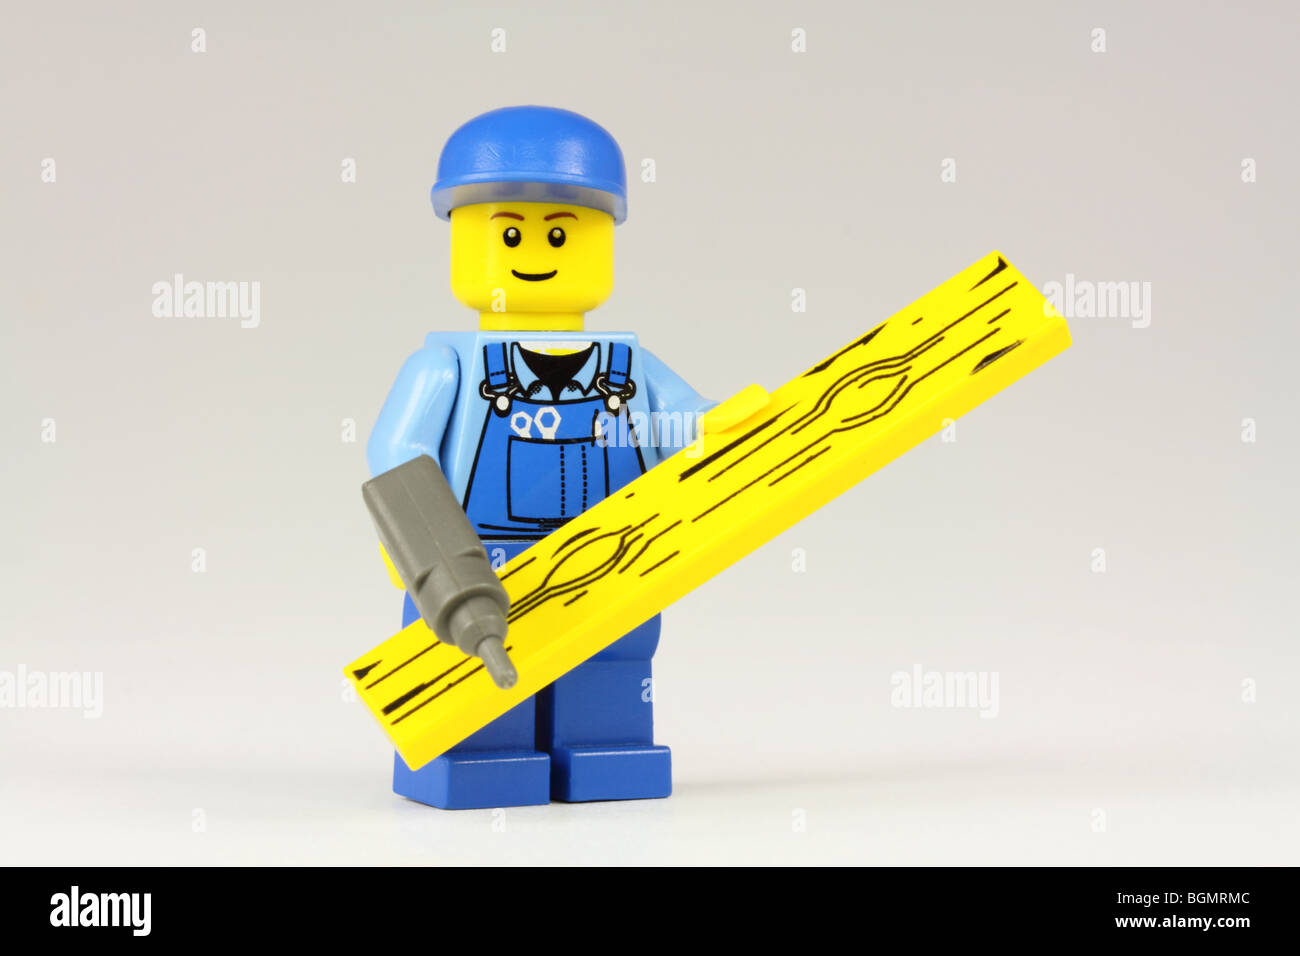 Lego DIY enthusiast or handyman with drill and plank Stock Photo